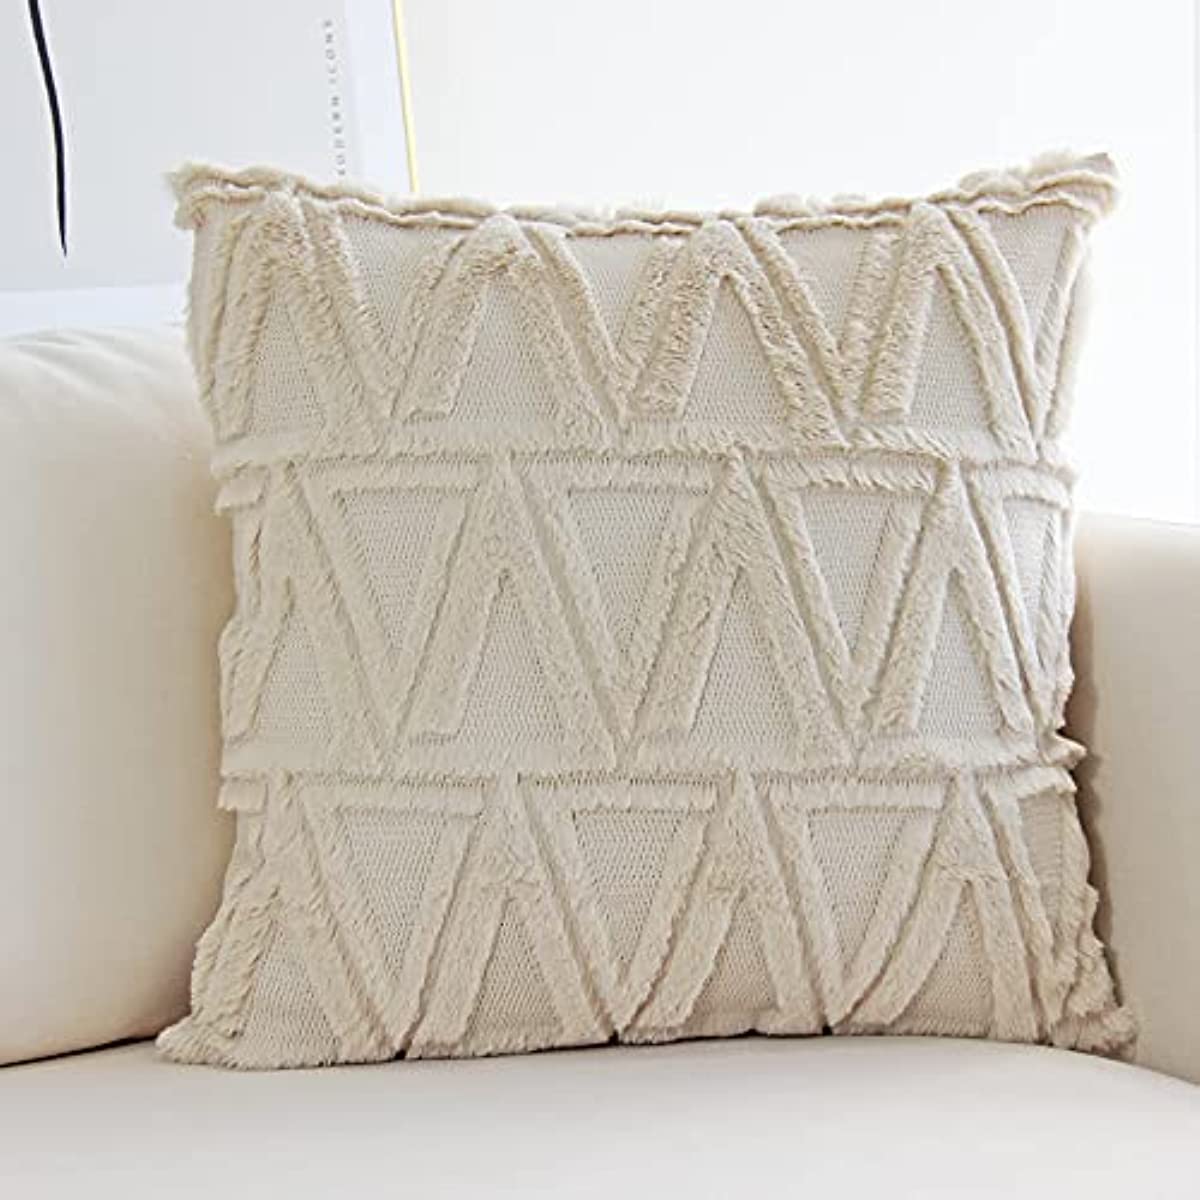 Anhome Plush Short Wool Velvet Decorative Throw Pillow Covers Luxury Style Cushion Case Faux Fur Fluffy Pillowcases for Sofa Bedroom Pack of 2 20 x 20 Inch Beige